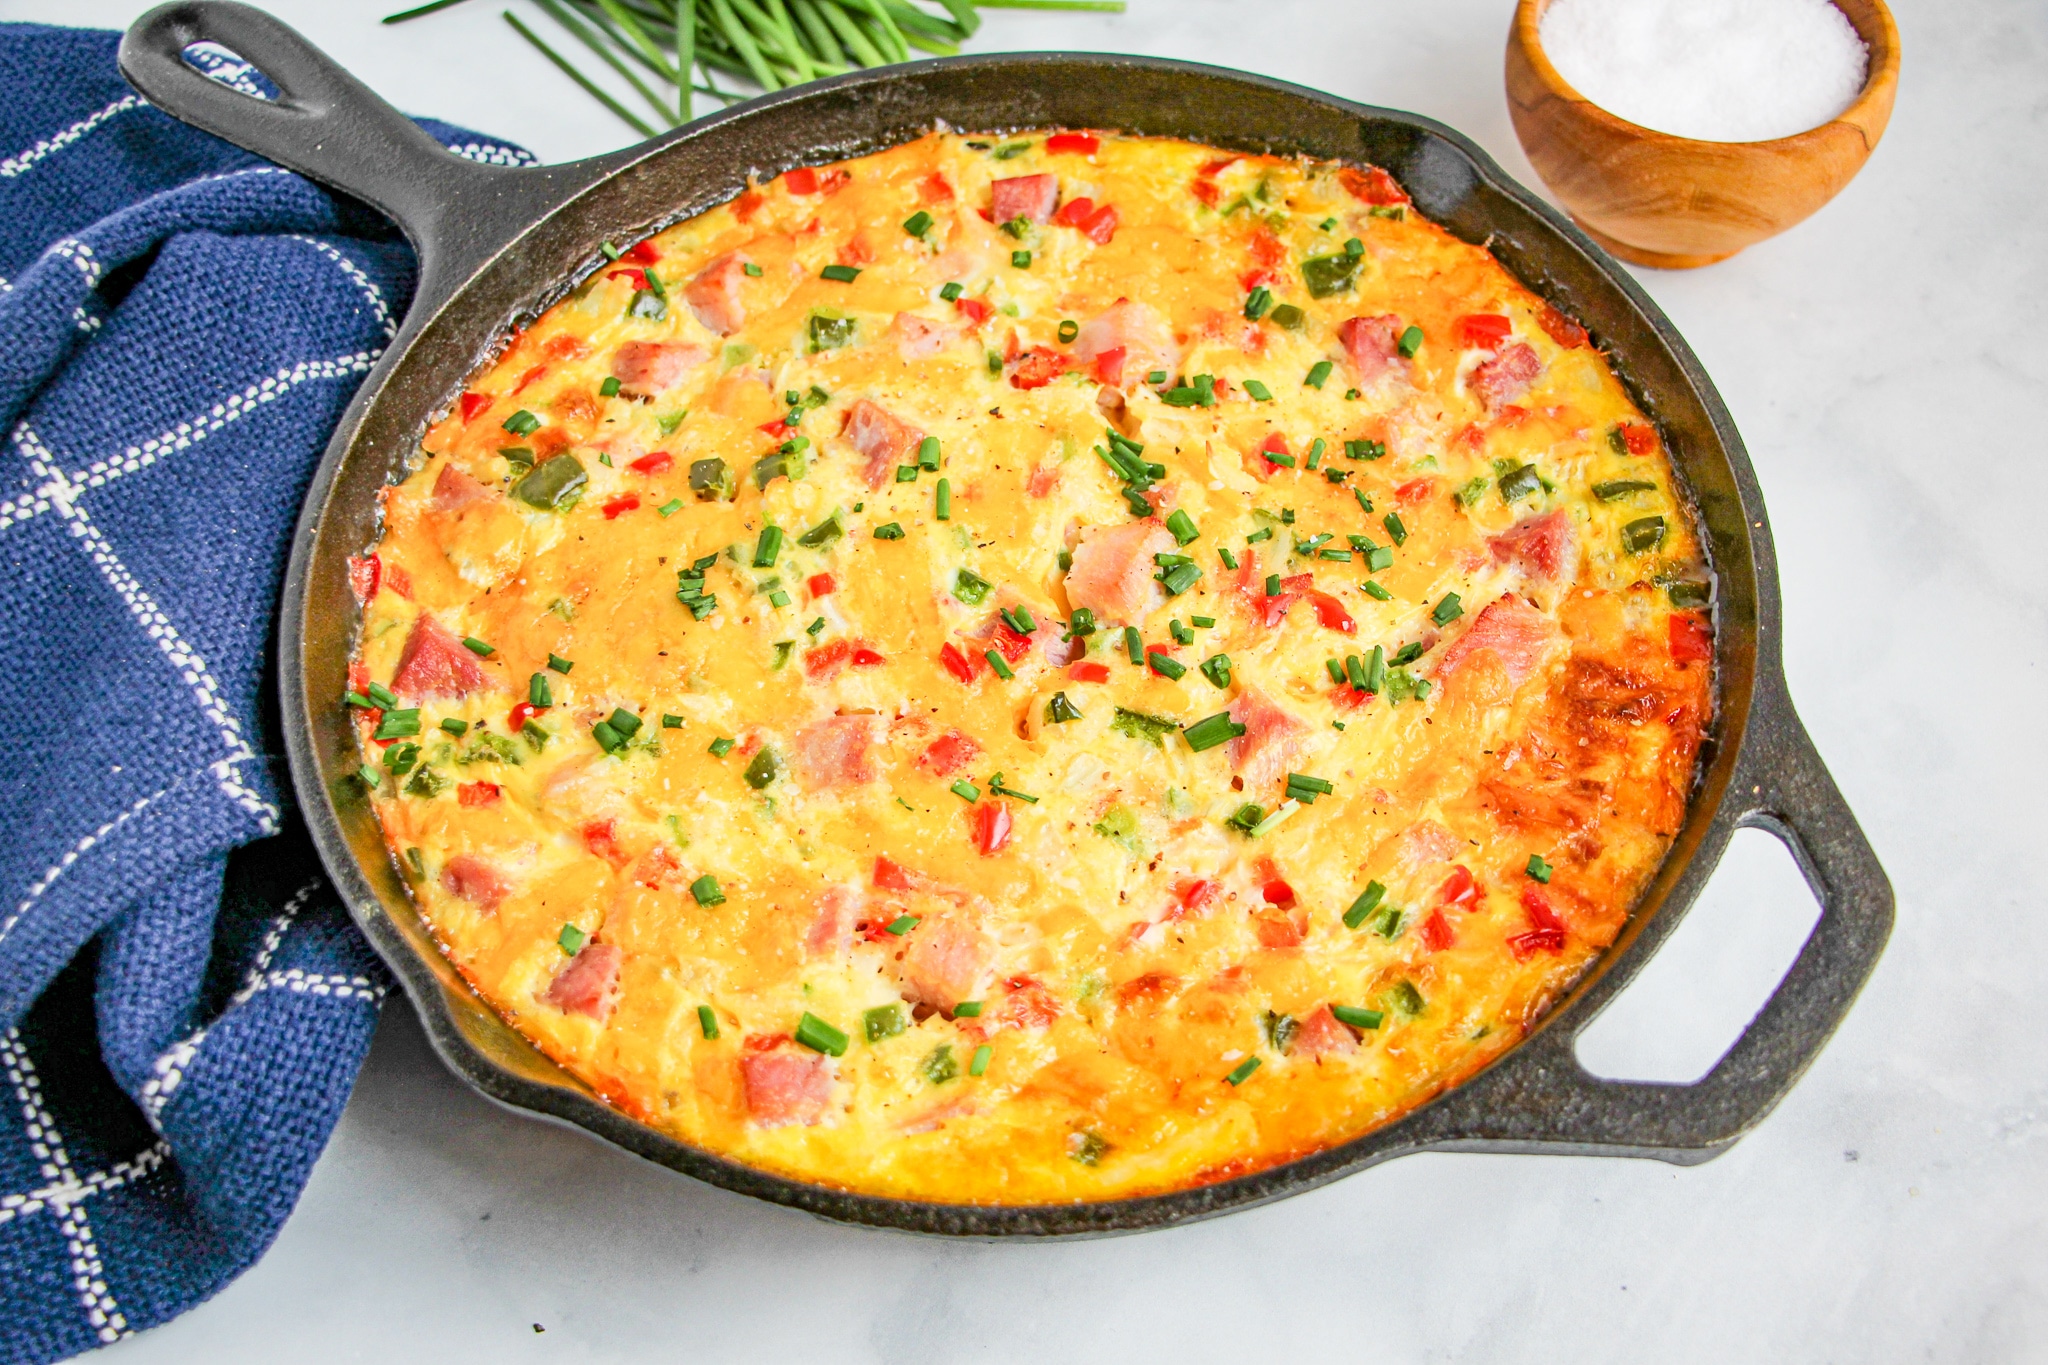 Western Omelette Frittata baked in a cast iron skillet garnished with chives